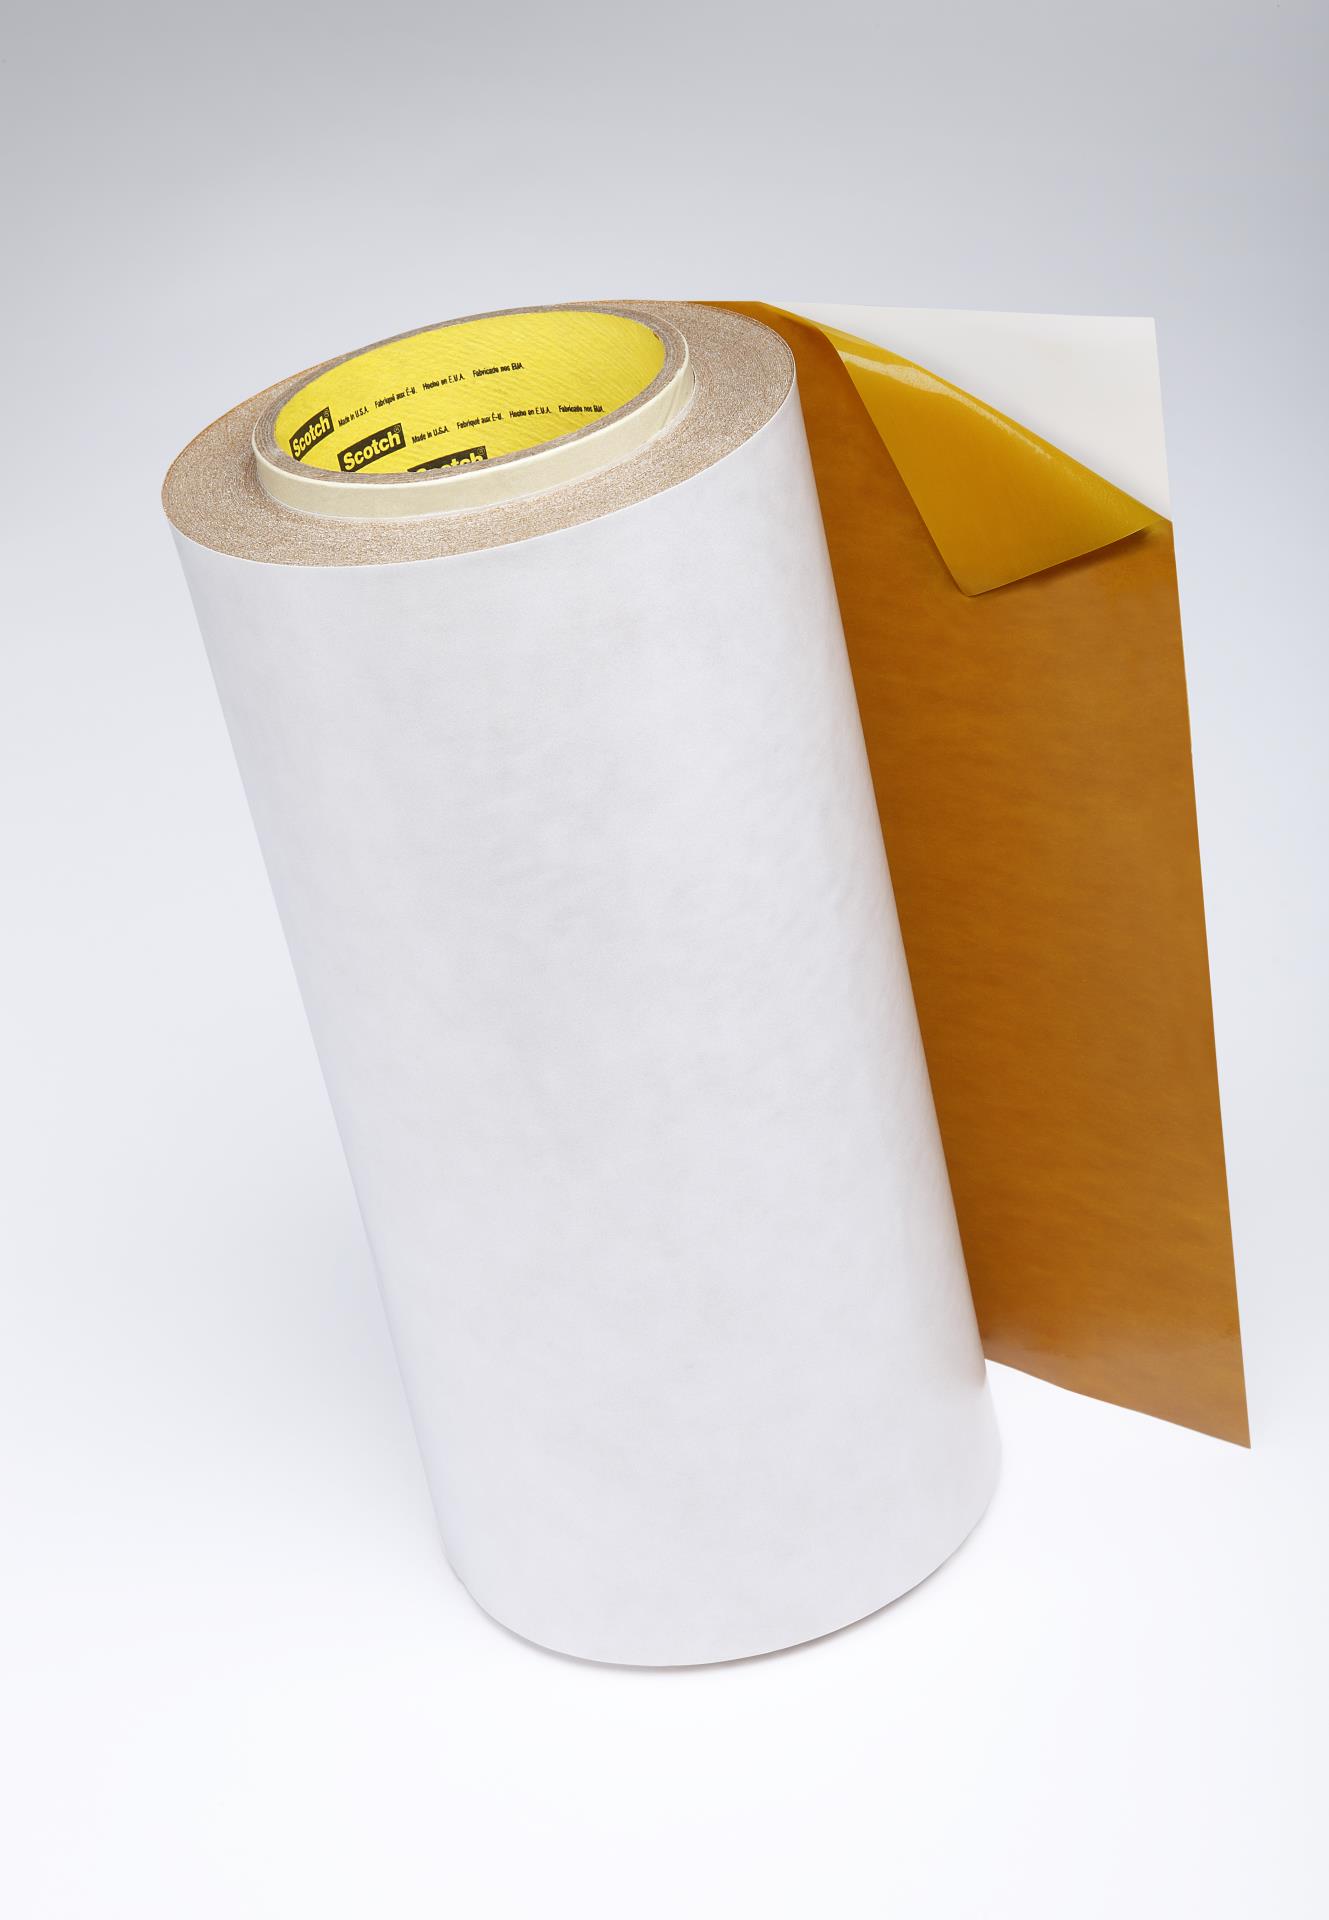 00021200118821 3M™ Thermal Bonding Film 583, 12 in x 60 yds, 4/Case, Bulk | products | na | 6292310